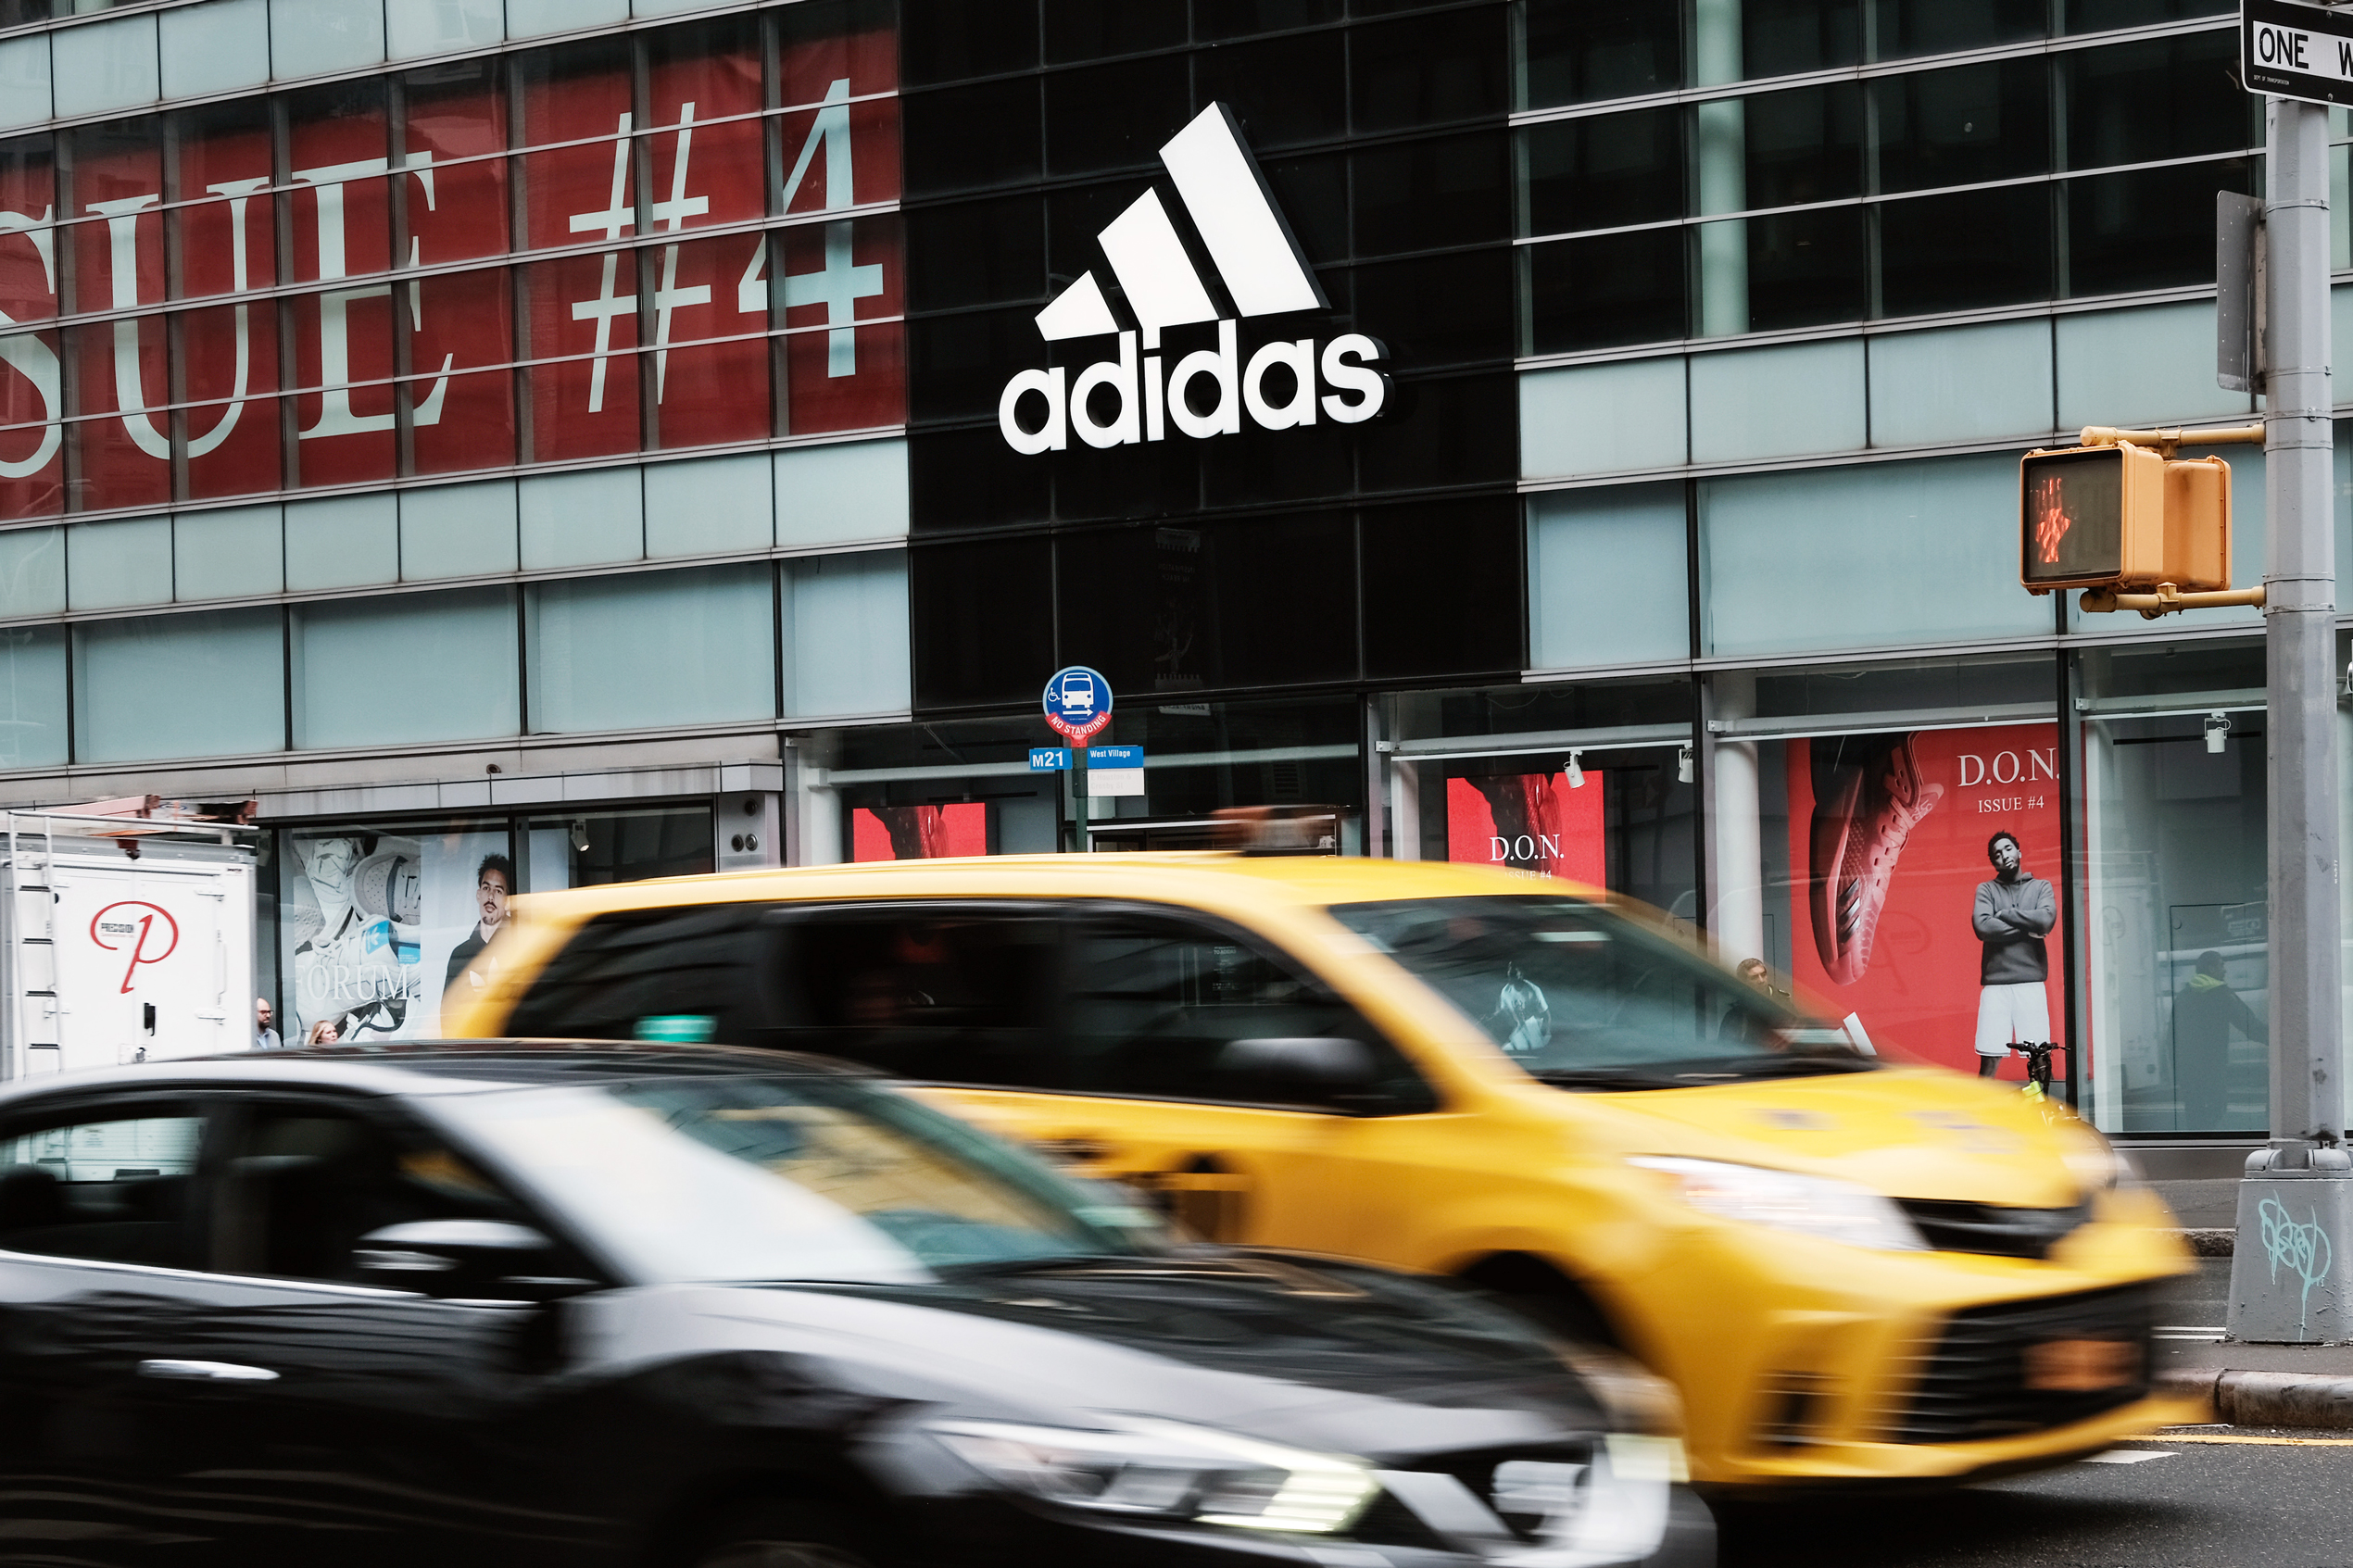 Adidas criticized for sharing explicit images on Twitter to